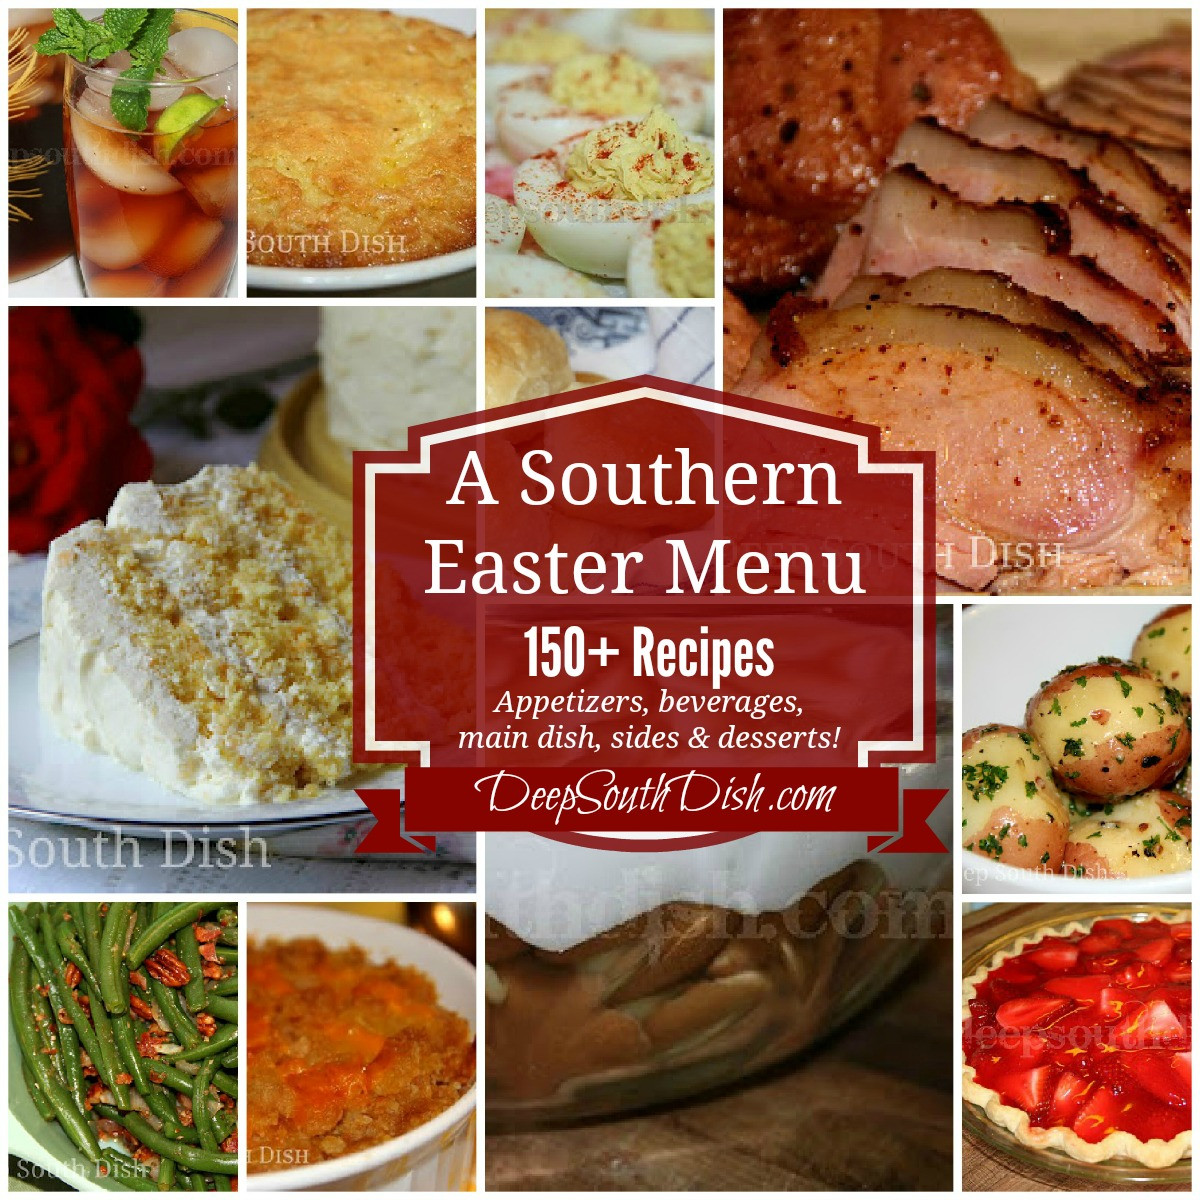 Ideas For Easter Dinner Menu
 Deep South Dish Southern Easter Menu Ideas and Recipes